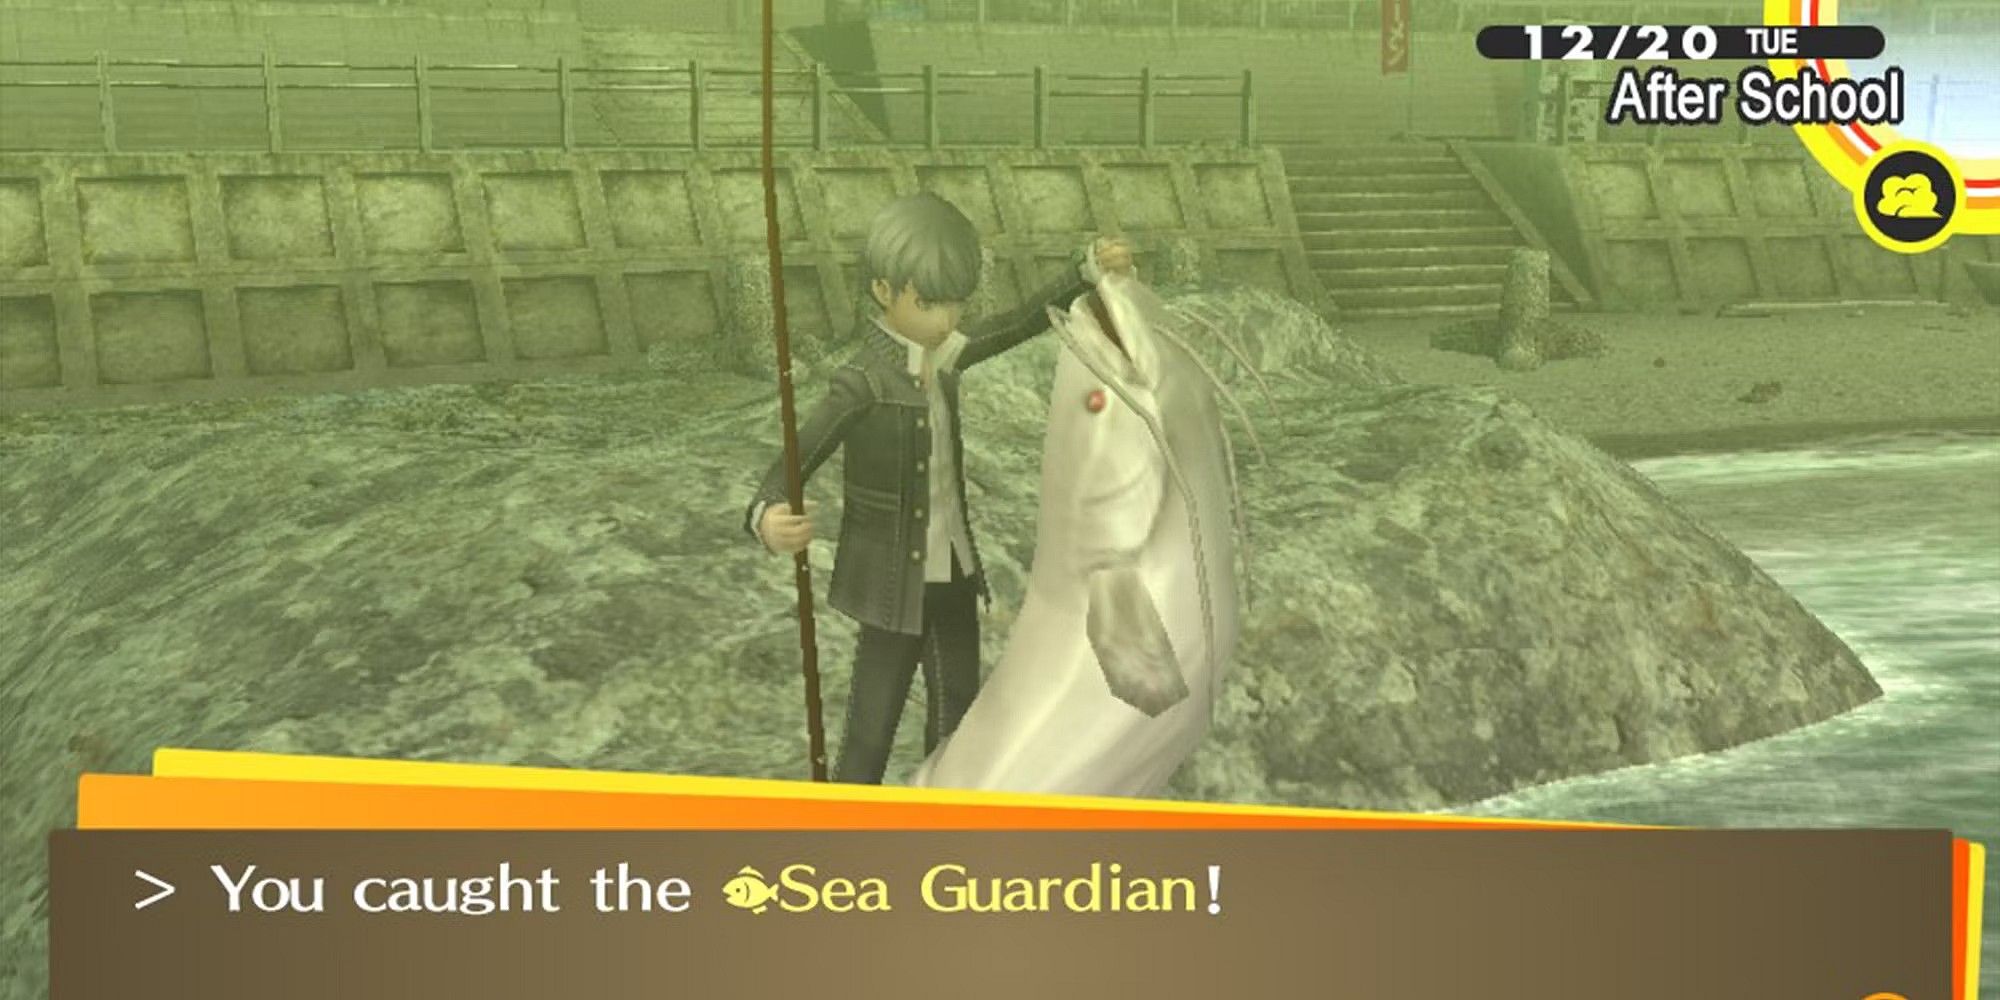 How To Catch The Sea Guardian In Persona 4 Golden